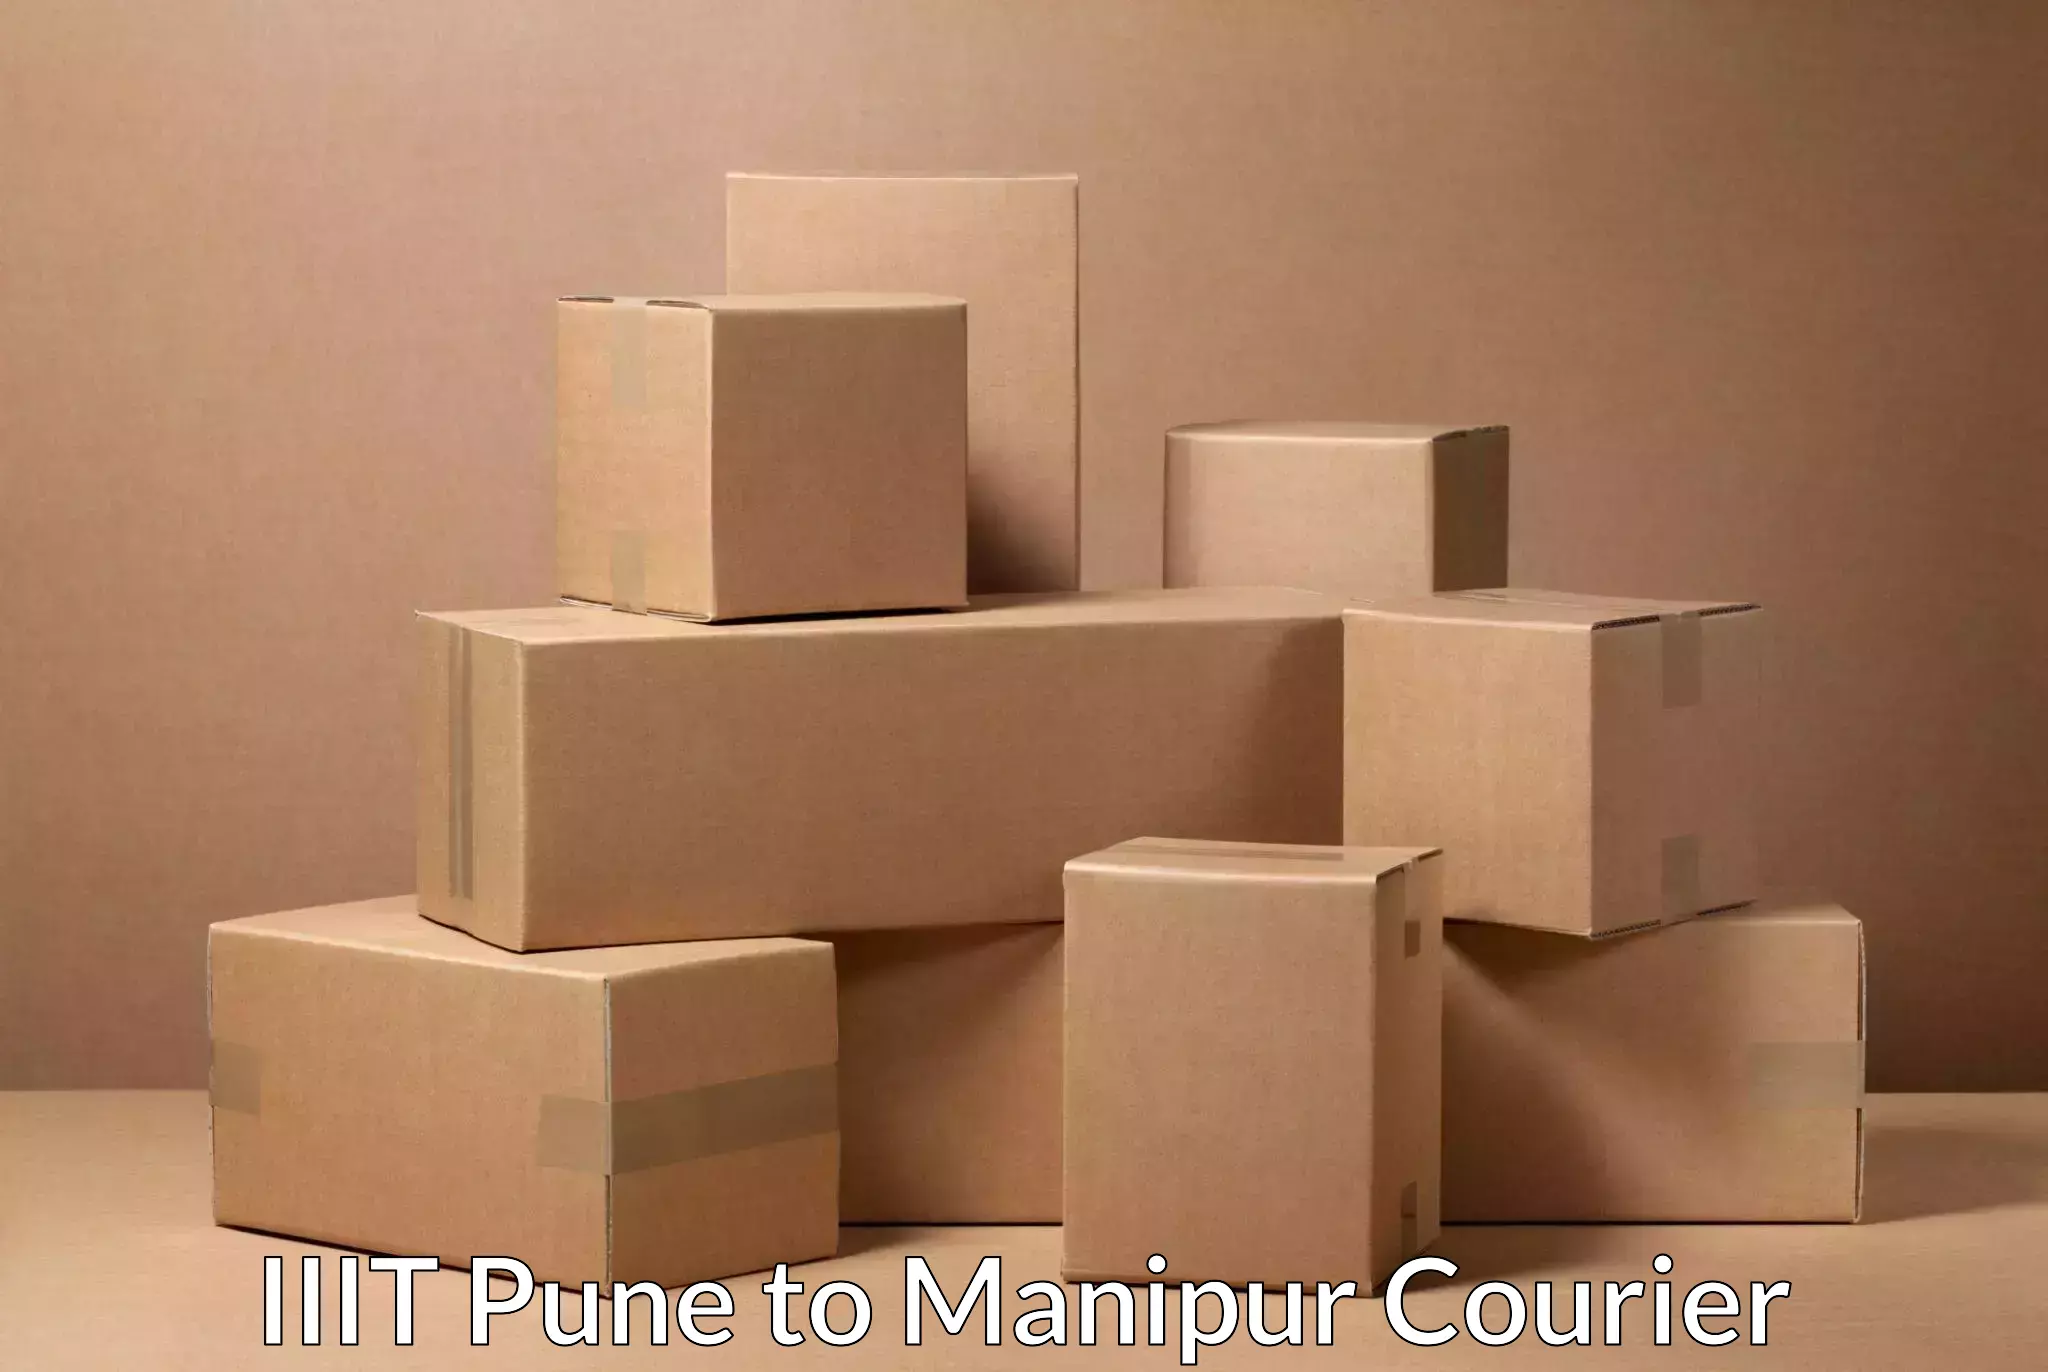 Express postal services in IIIT Pune to Manipur